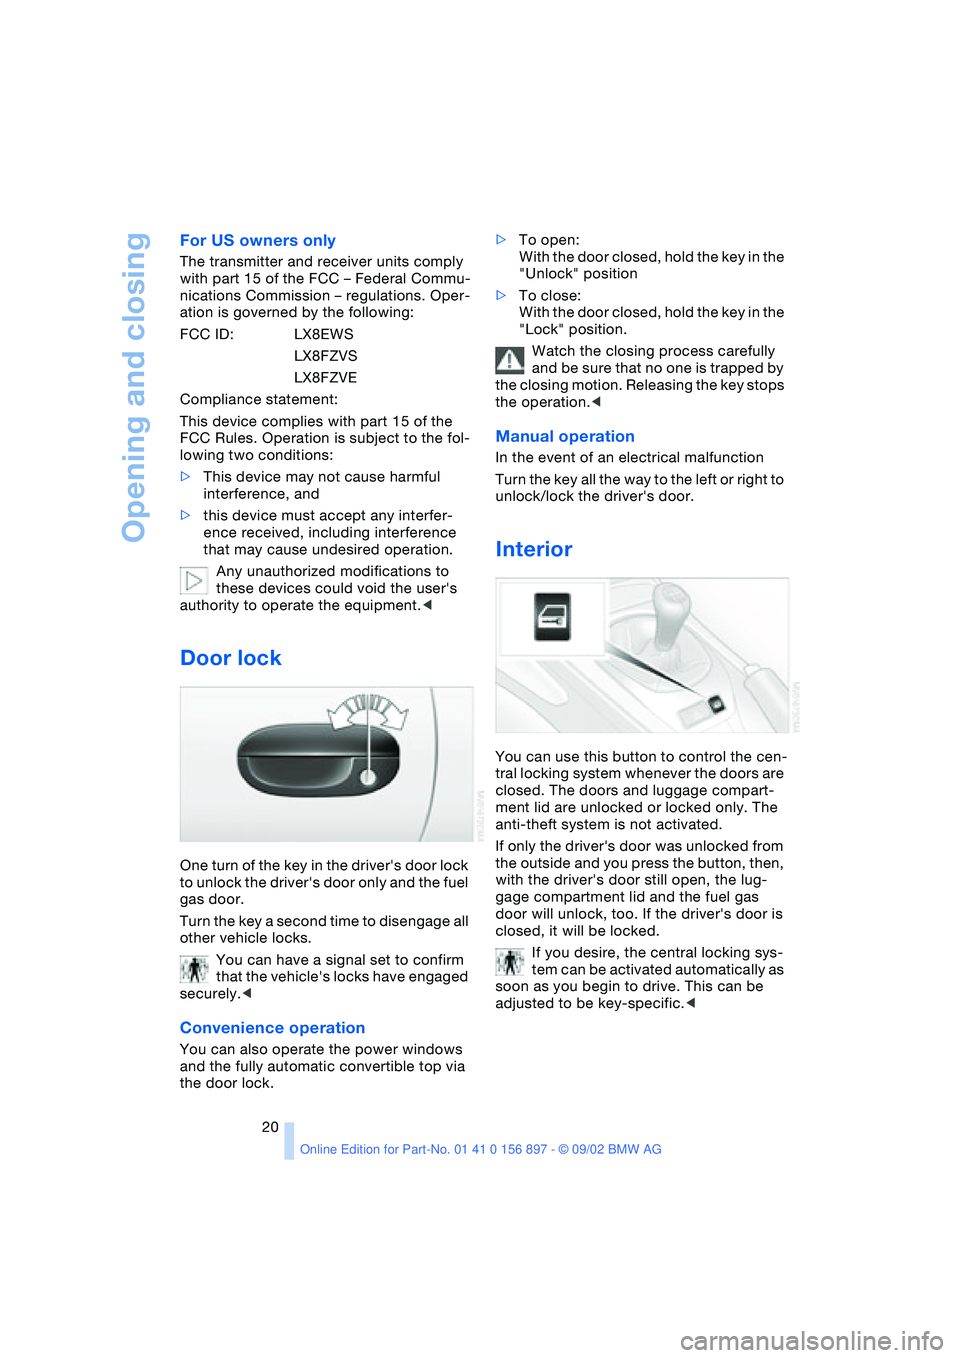 BMW Z4 2.5I 2003  Owners Manual Opening and closing
20
For US owners only
The transmitter and receiver units comply 
with part 15 of the FCC – Federal Commu-
nications Commission – regulations. Oper-
ation is governed by the fol